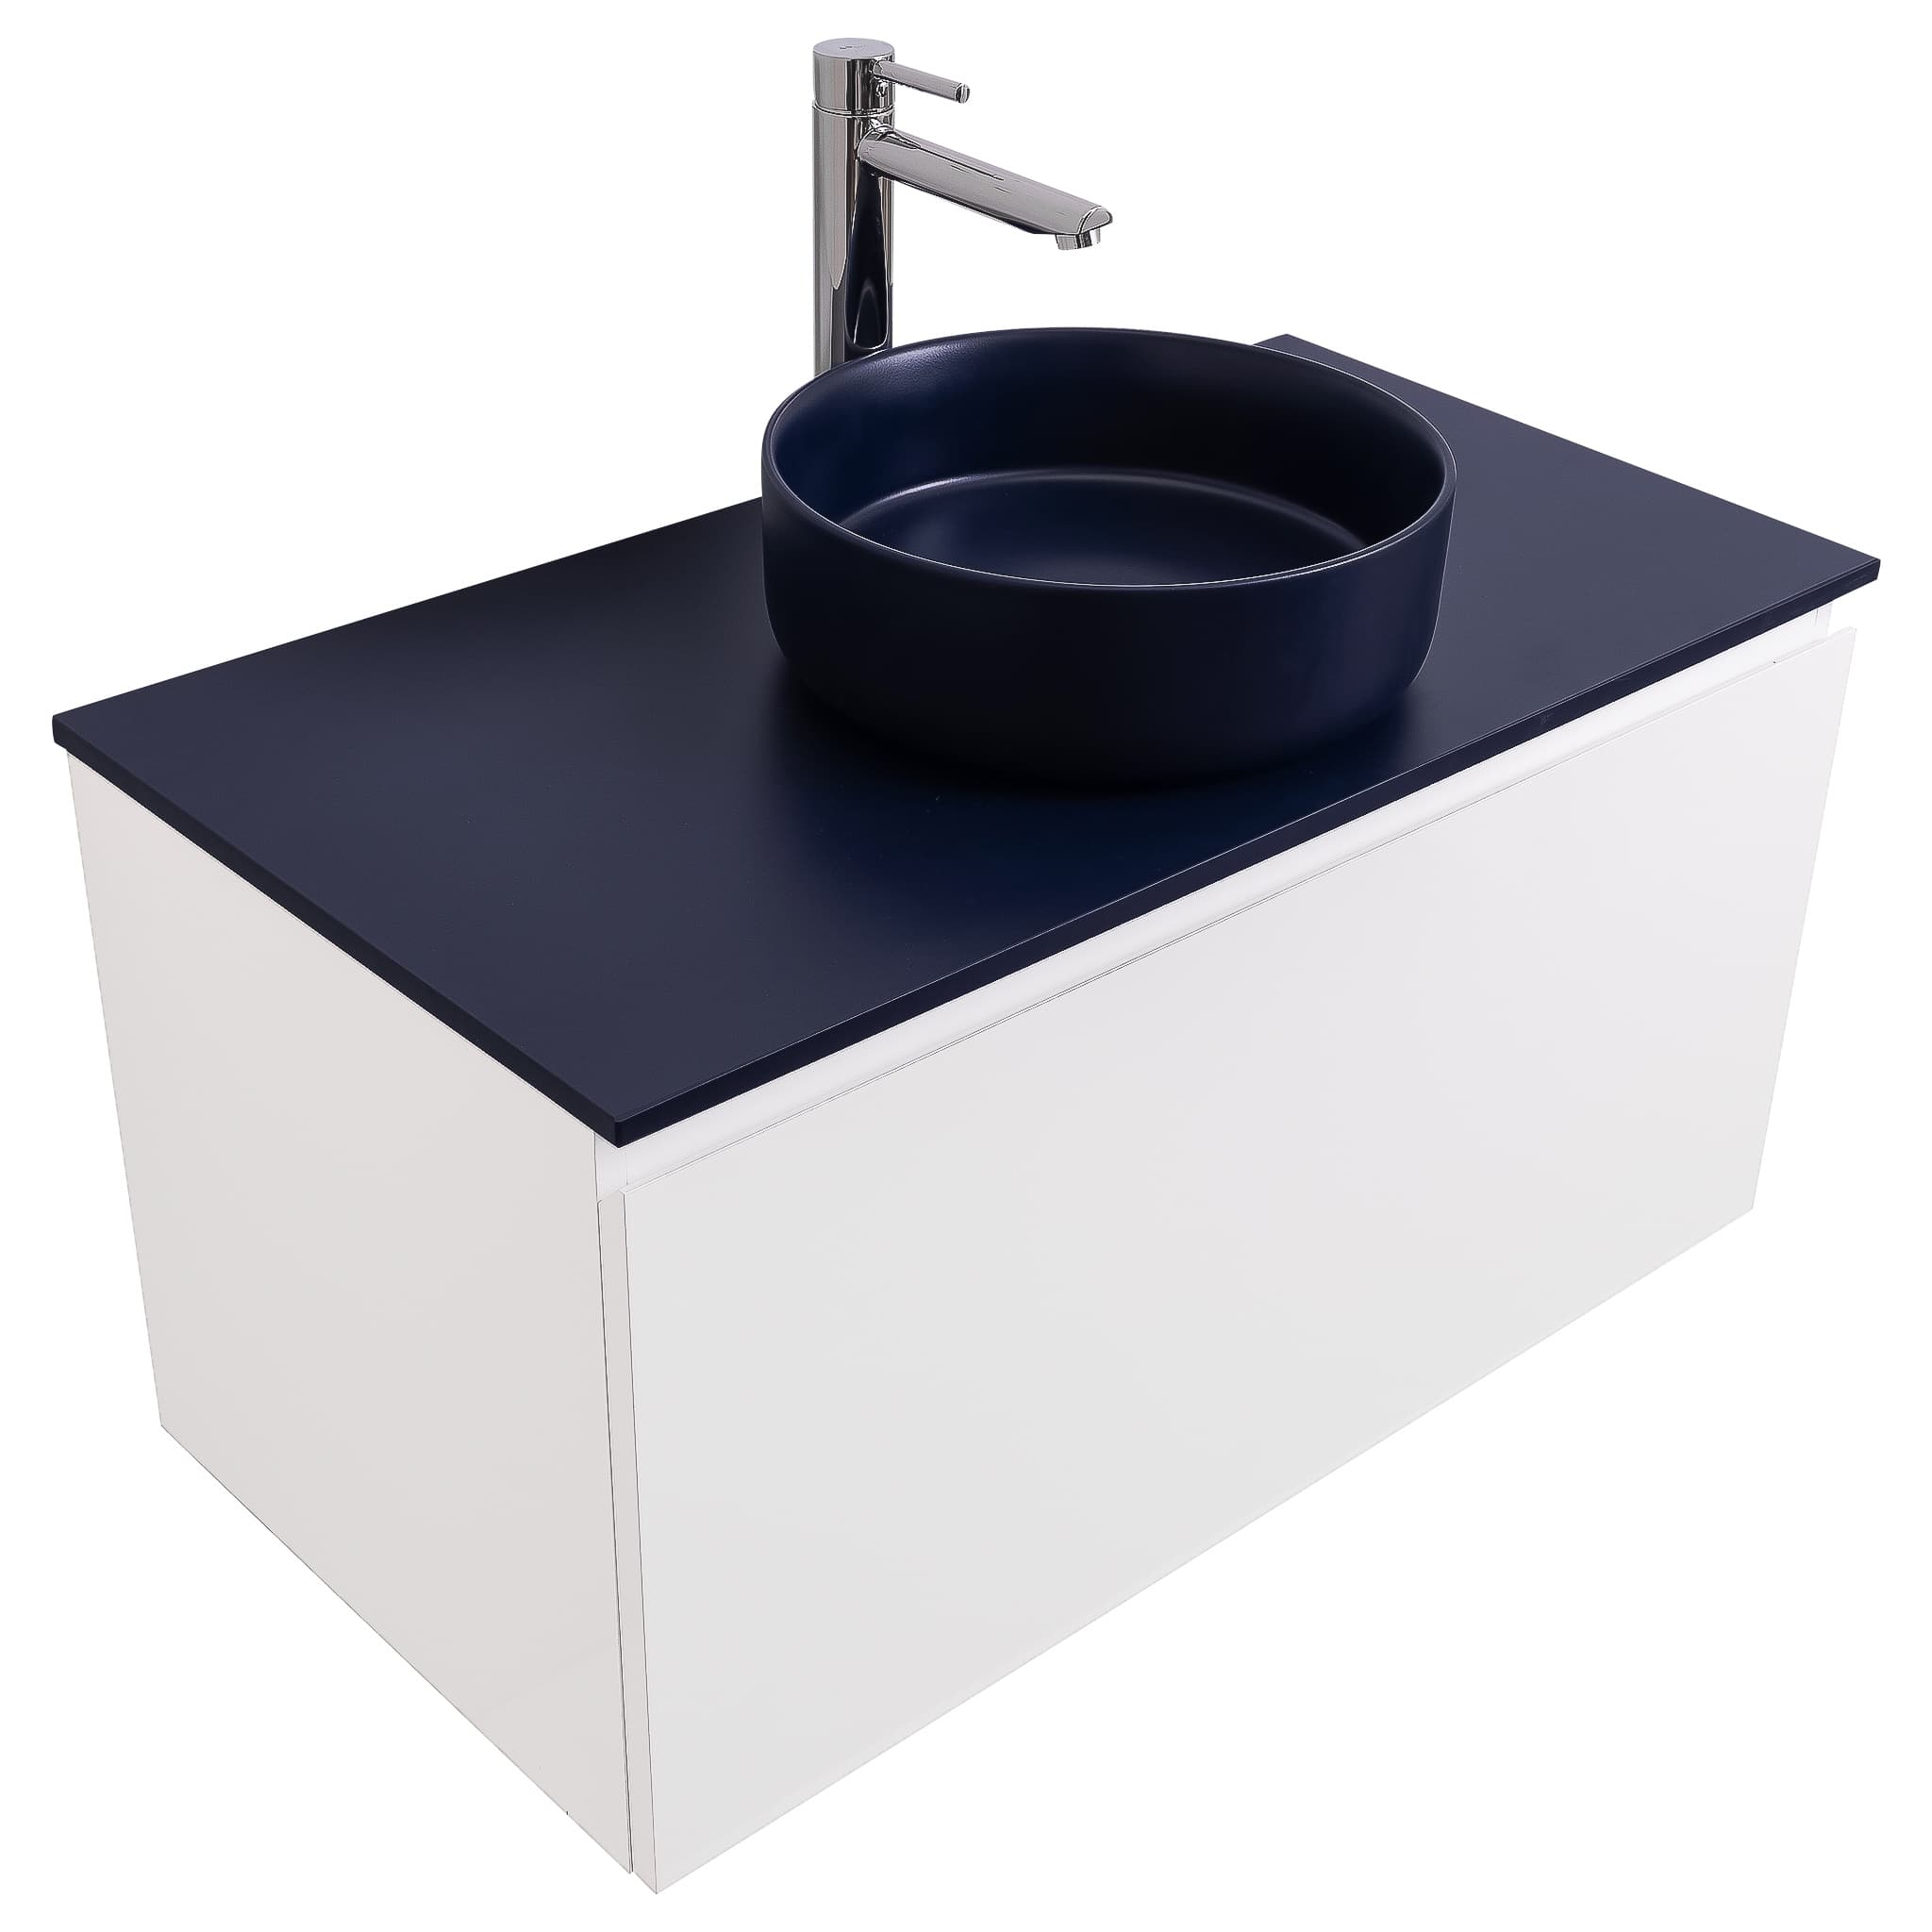 Venice 35.5 White High Gloss Cabinet, Ares Navy Blue Top And Ares Navy Blue Ceramic Basin, Wall Mounted Modern Vanity Set